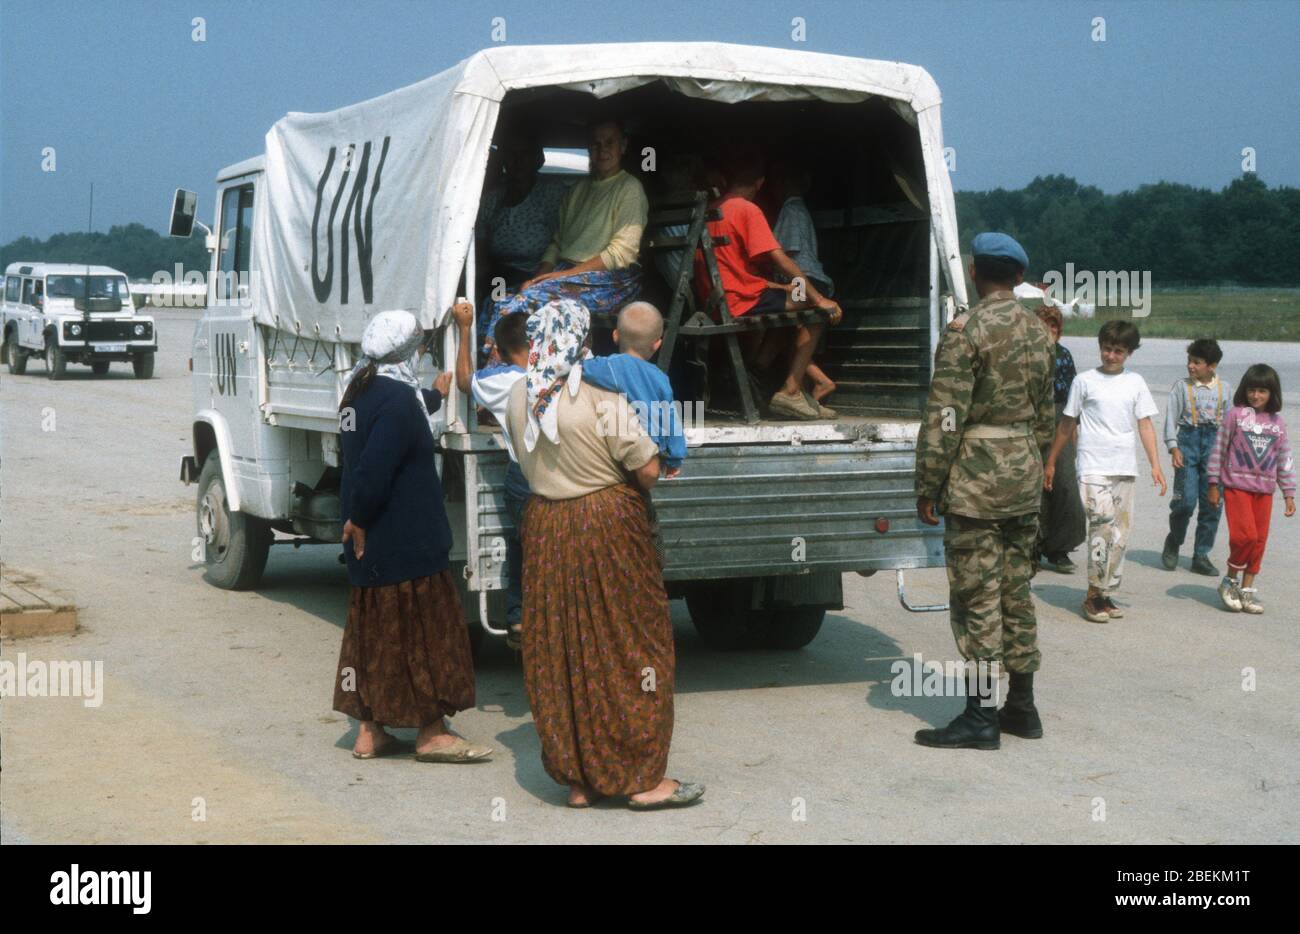 1995 Tuzla - Tuzla airfield UN temporary refugee camp for Bosnian Muslims fleeing the Srebrenica Massacre during the Bosnian war. Vehicle collecting refugees pictured. Stock Photo